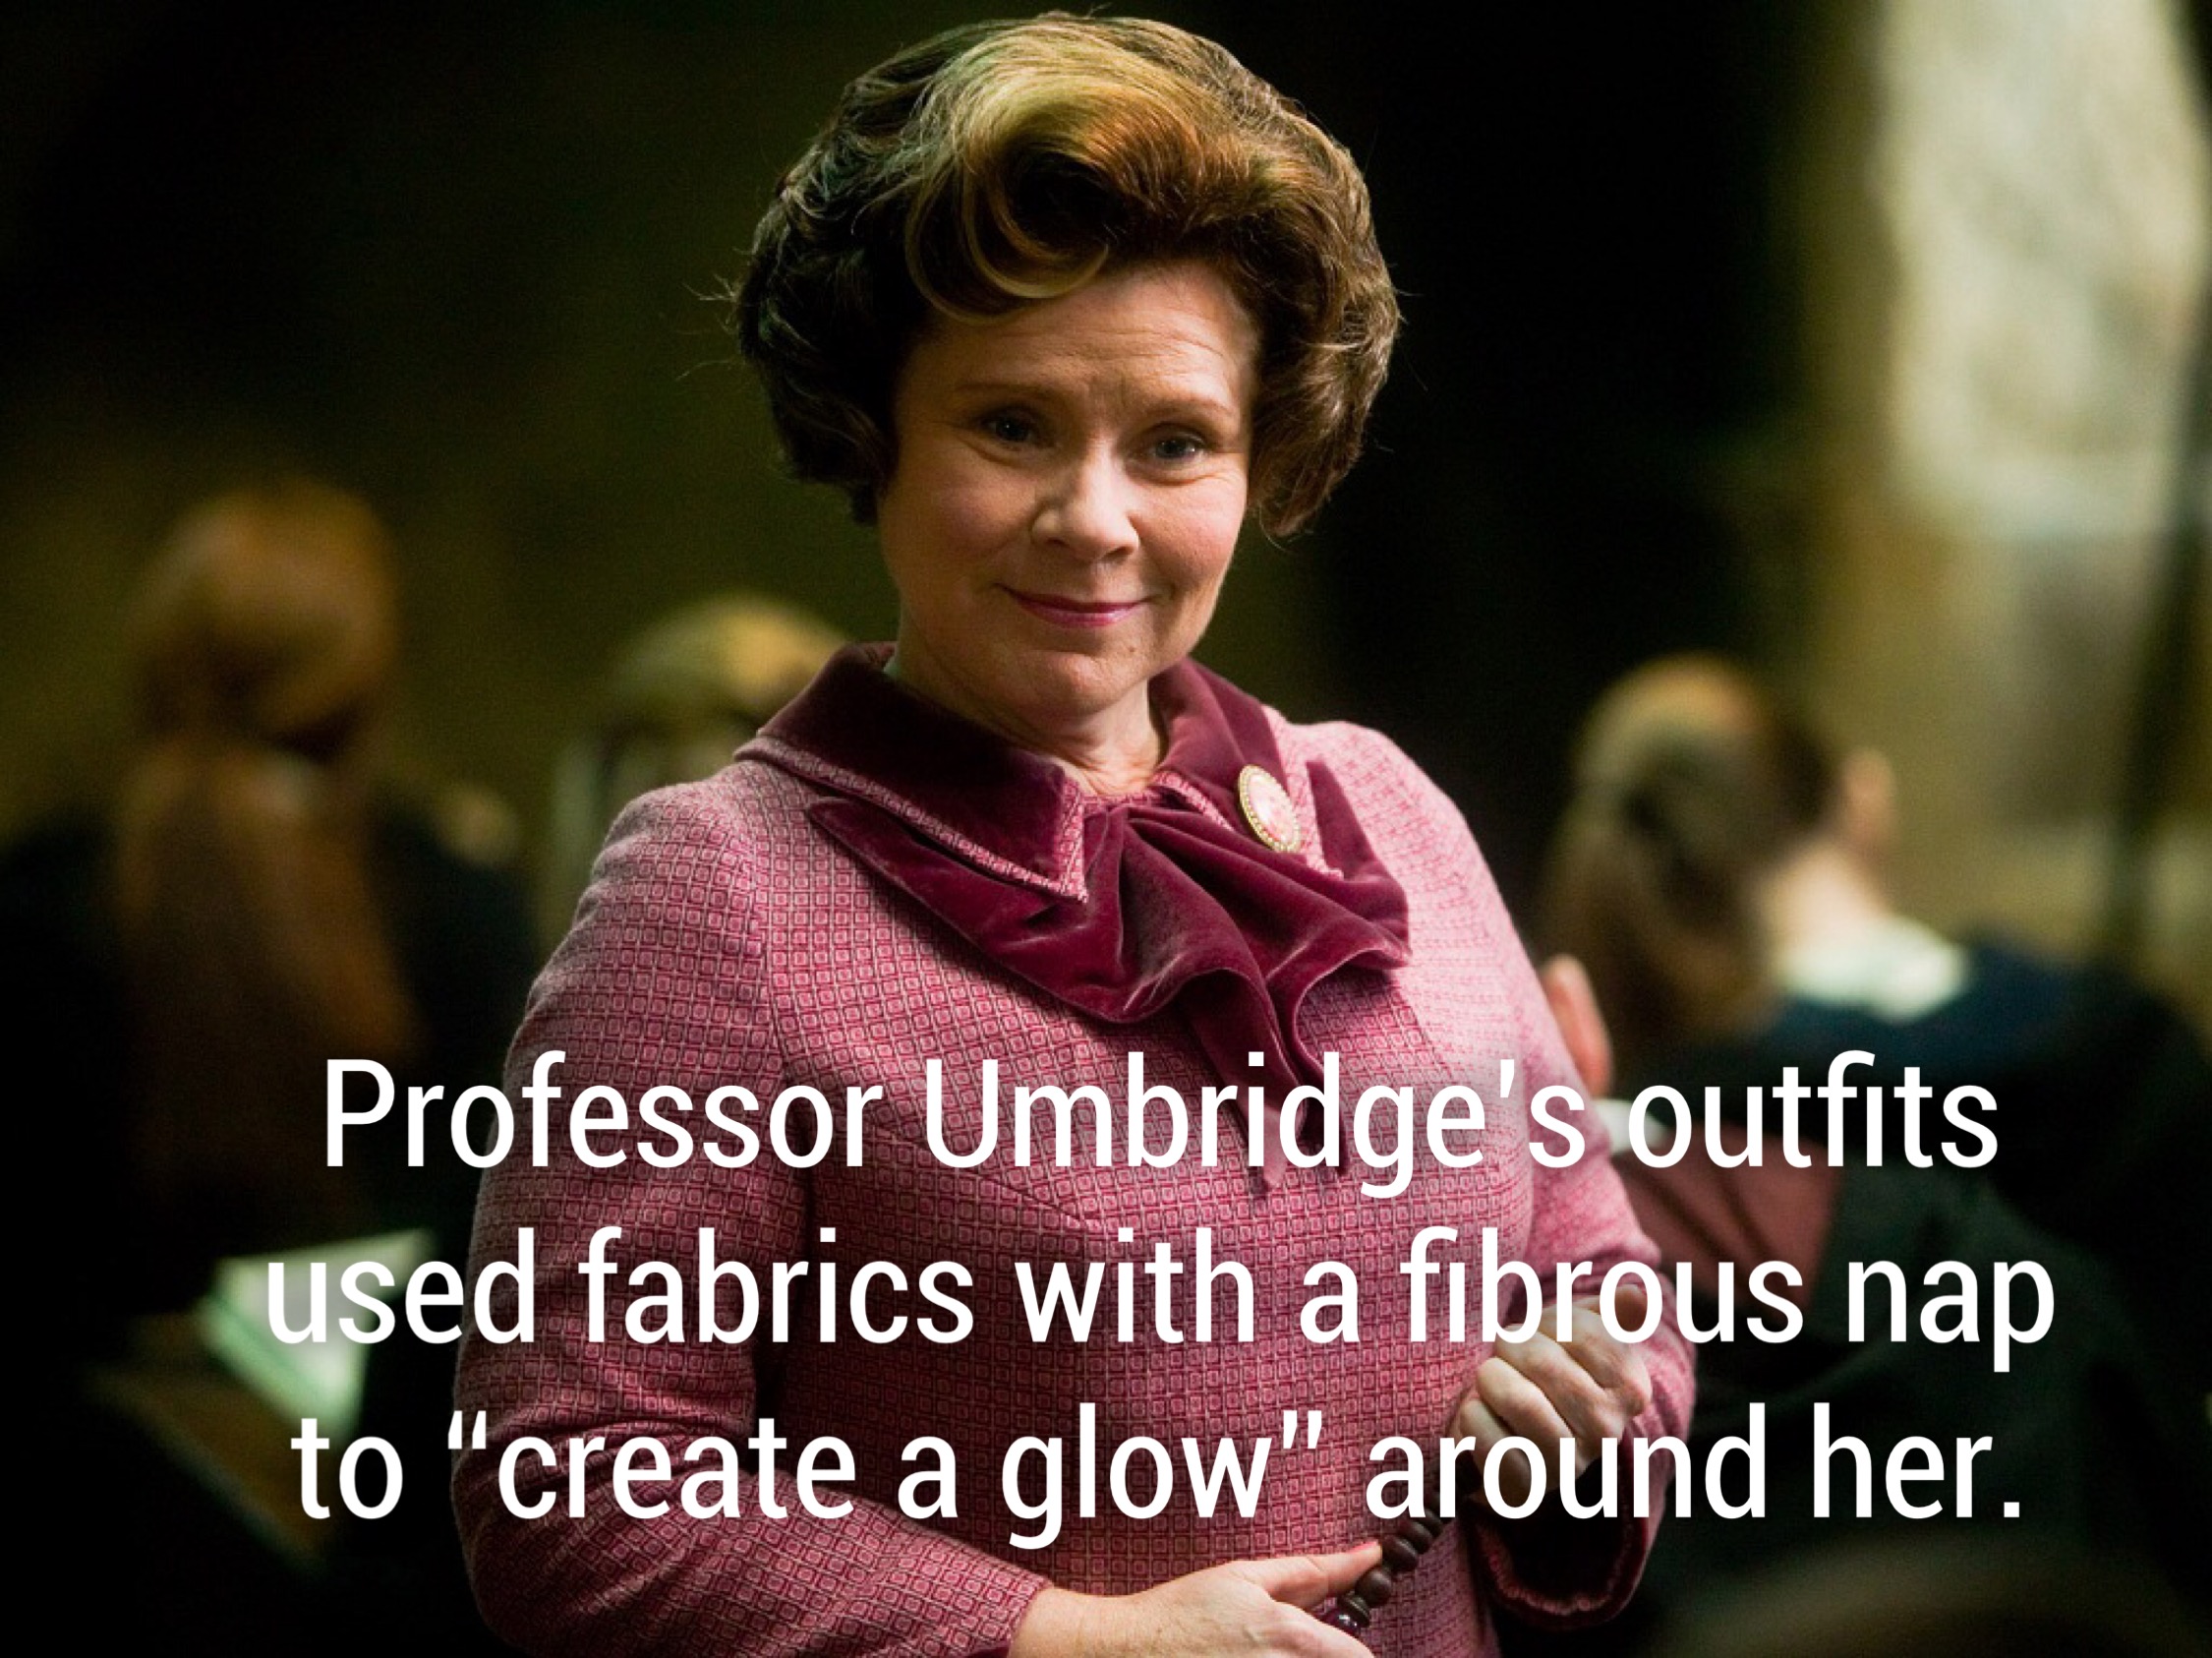 harry potter female characters - Professor Umbridge's outfits used fabrics with a fibrous nap to "create a glow" around her.